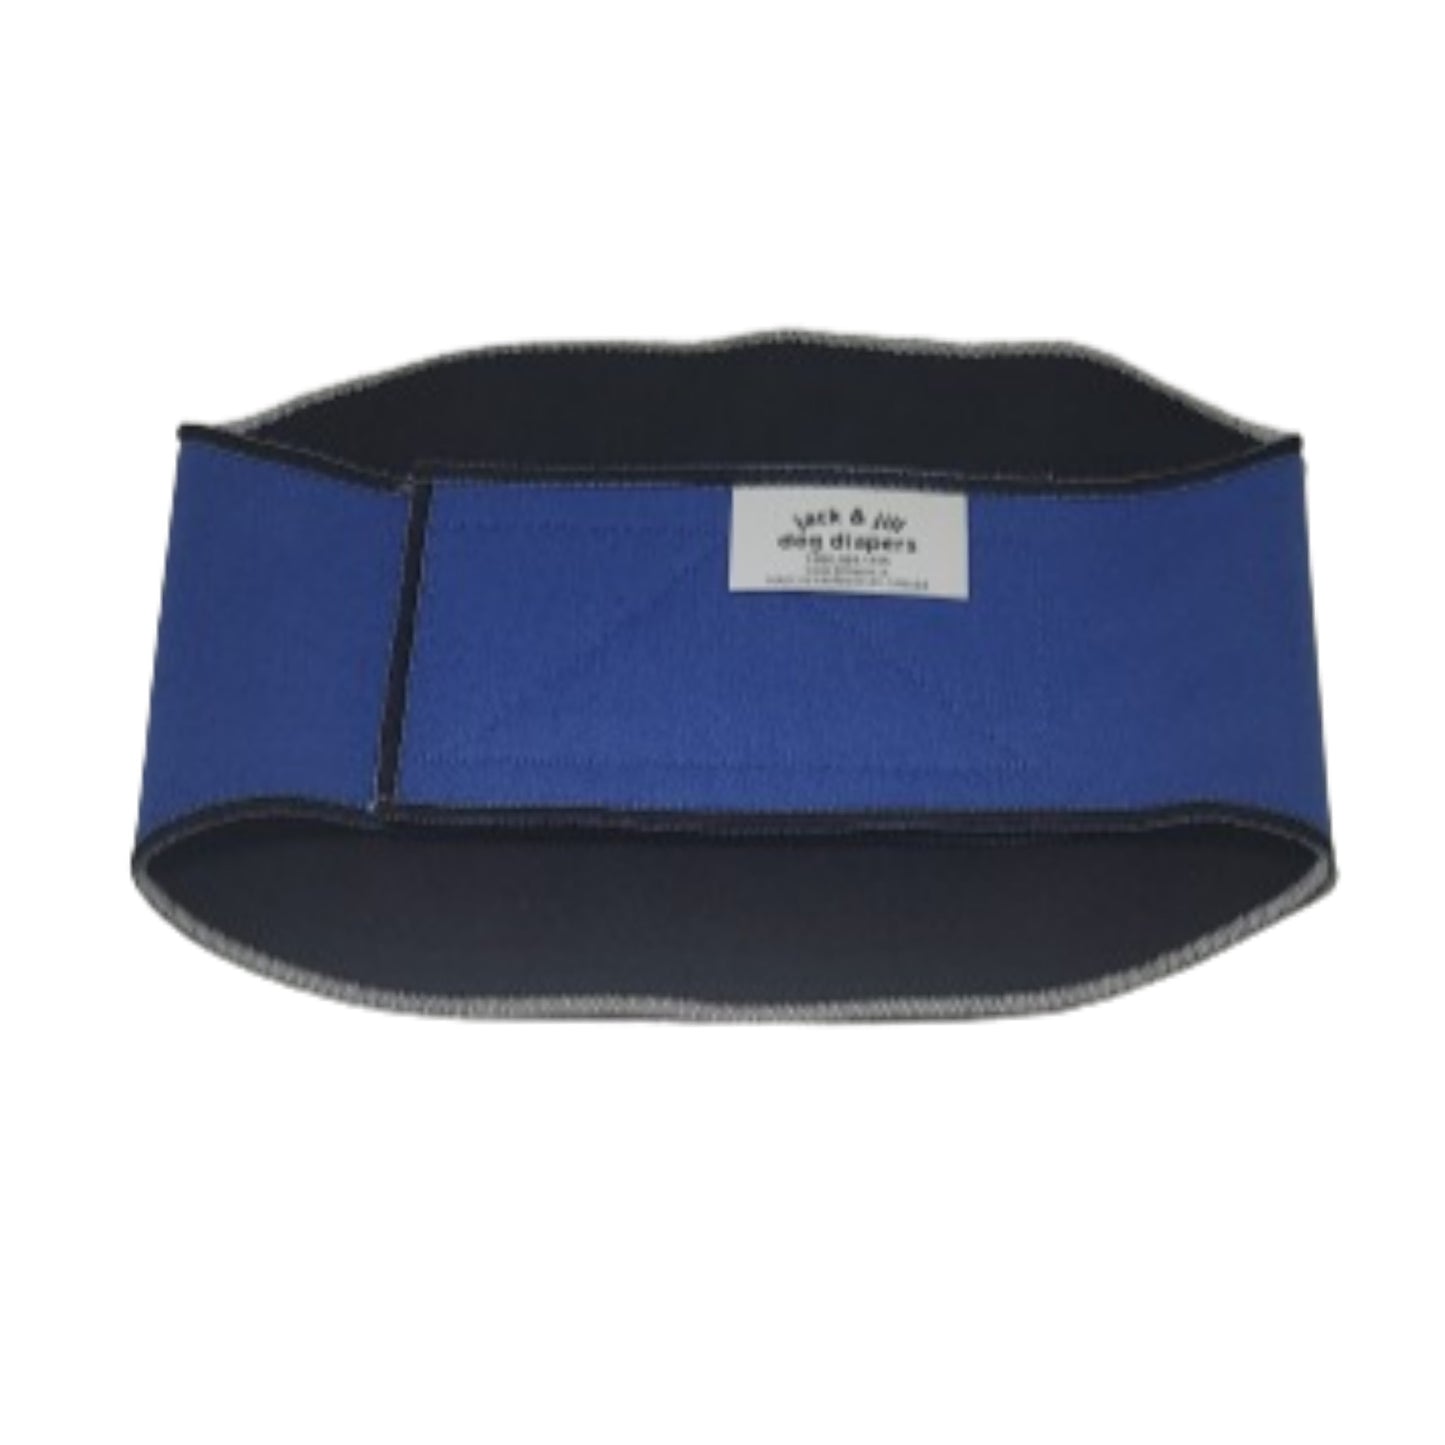 Male Dog Belly Band Wrap -Royal Blue  Style #2